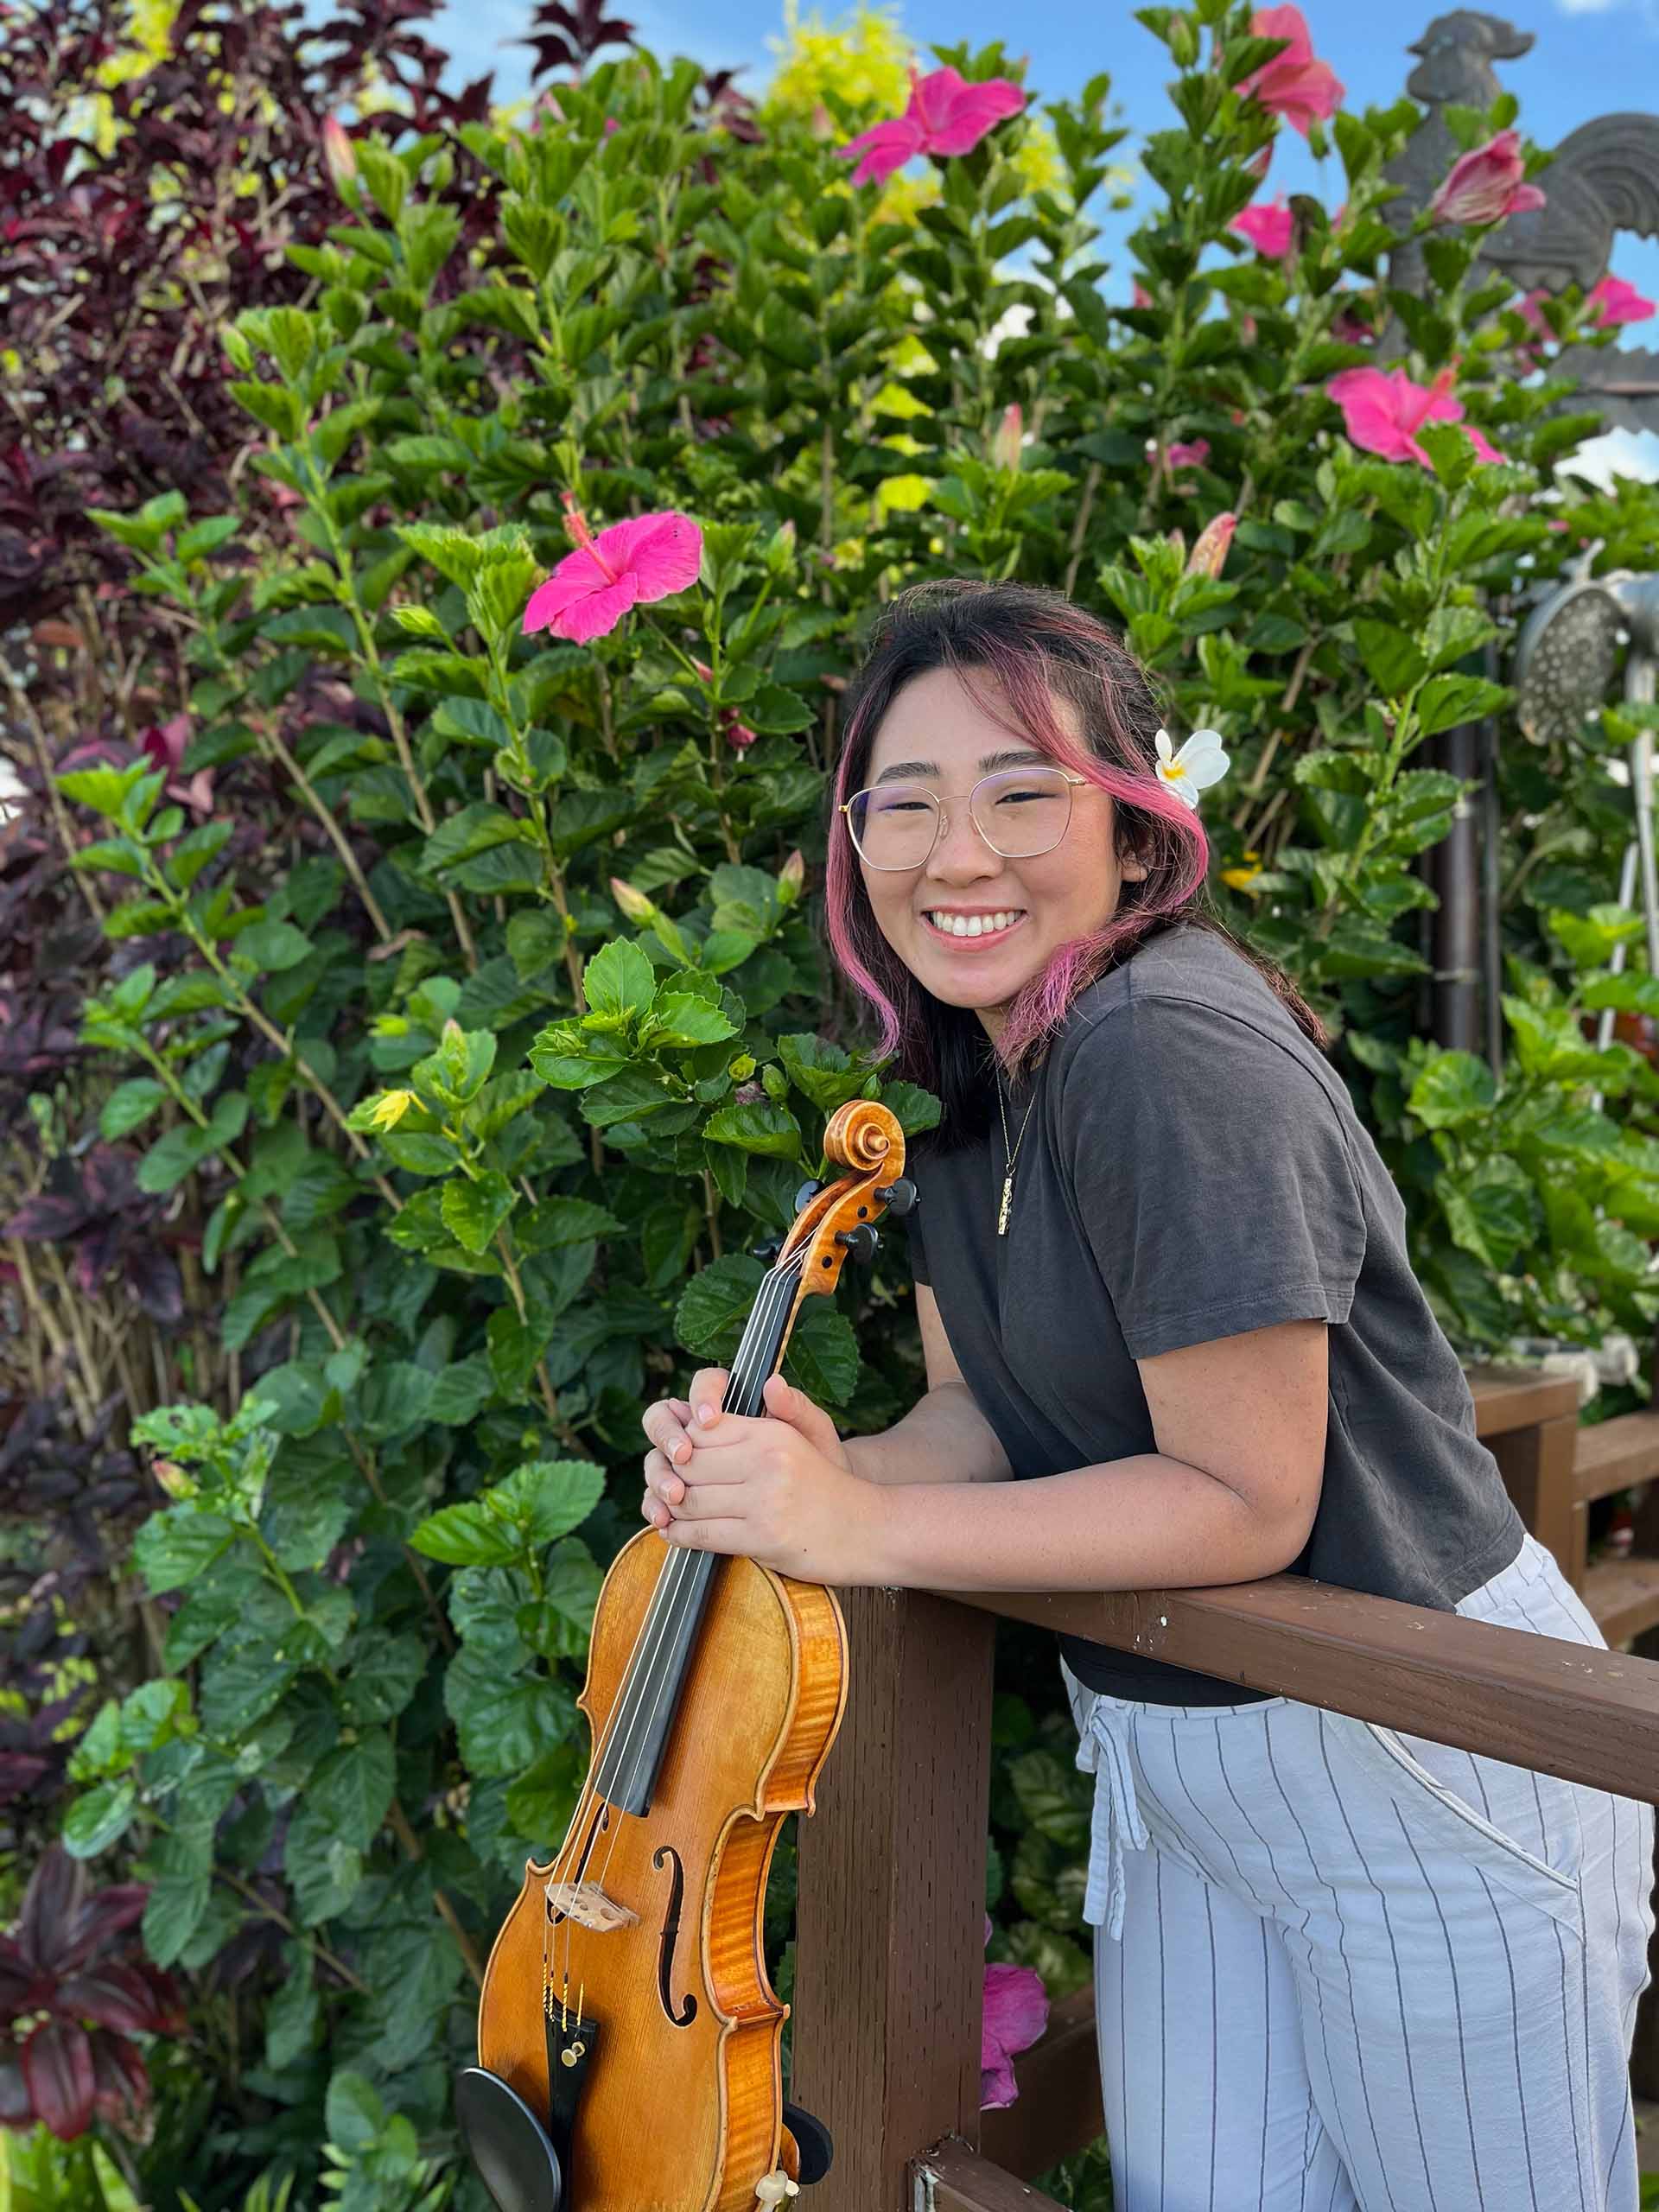 Kisa Uradomo holds her violin in front of bright pink hibiscus flowers